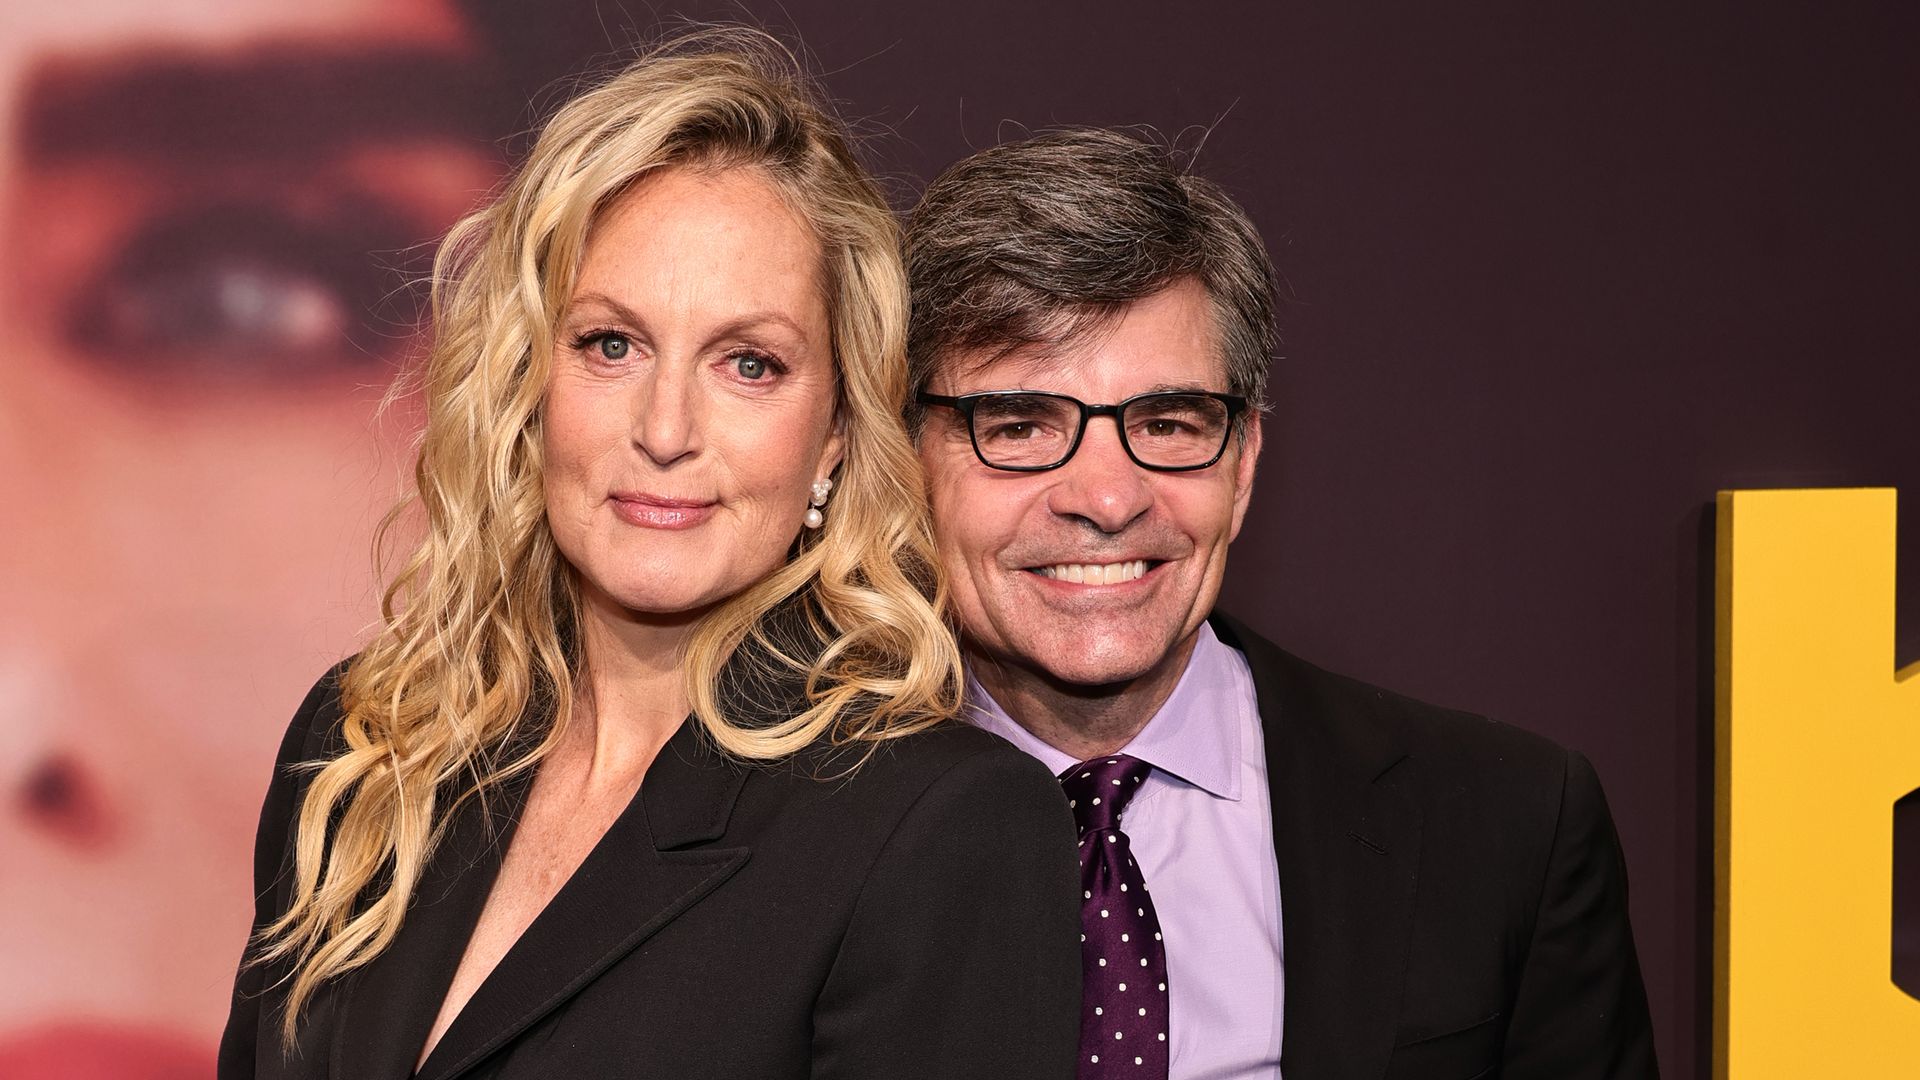 Ali Wentworth and George Stephanopoulos in black suits